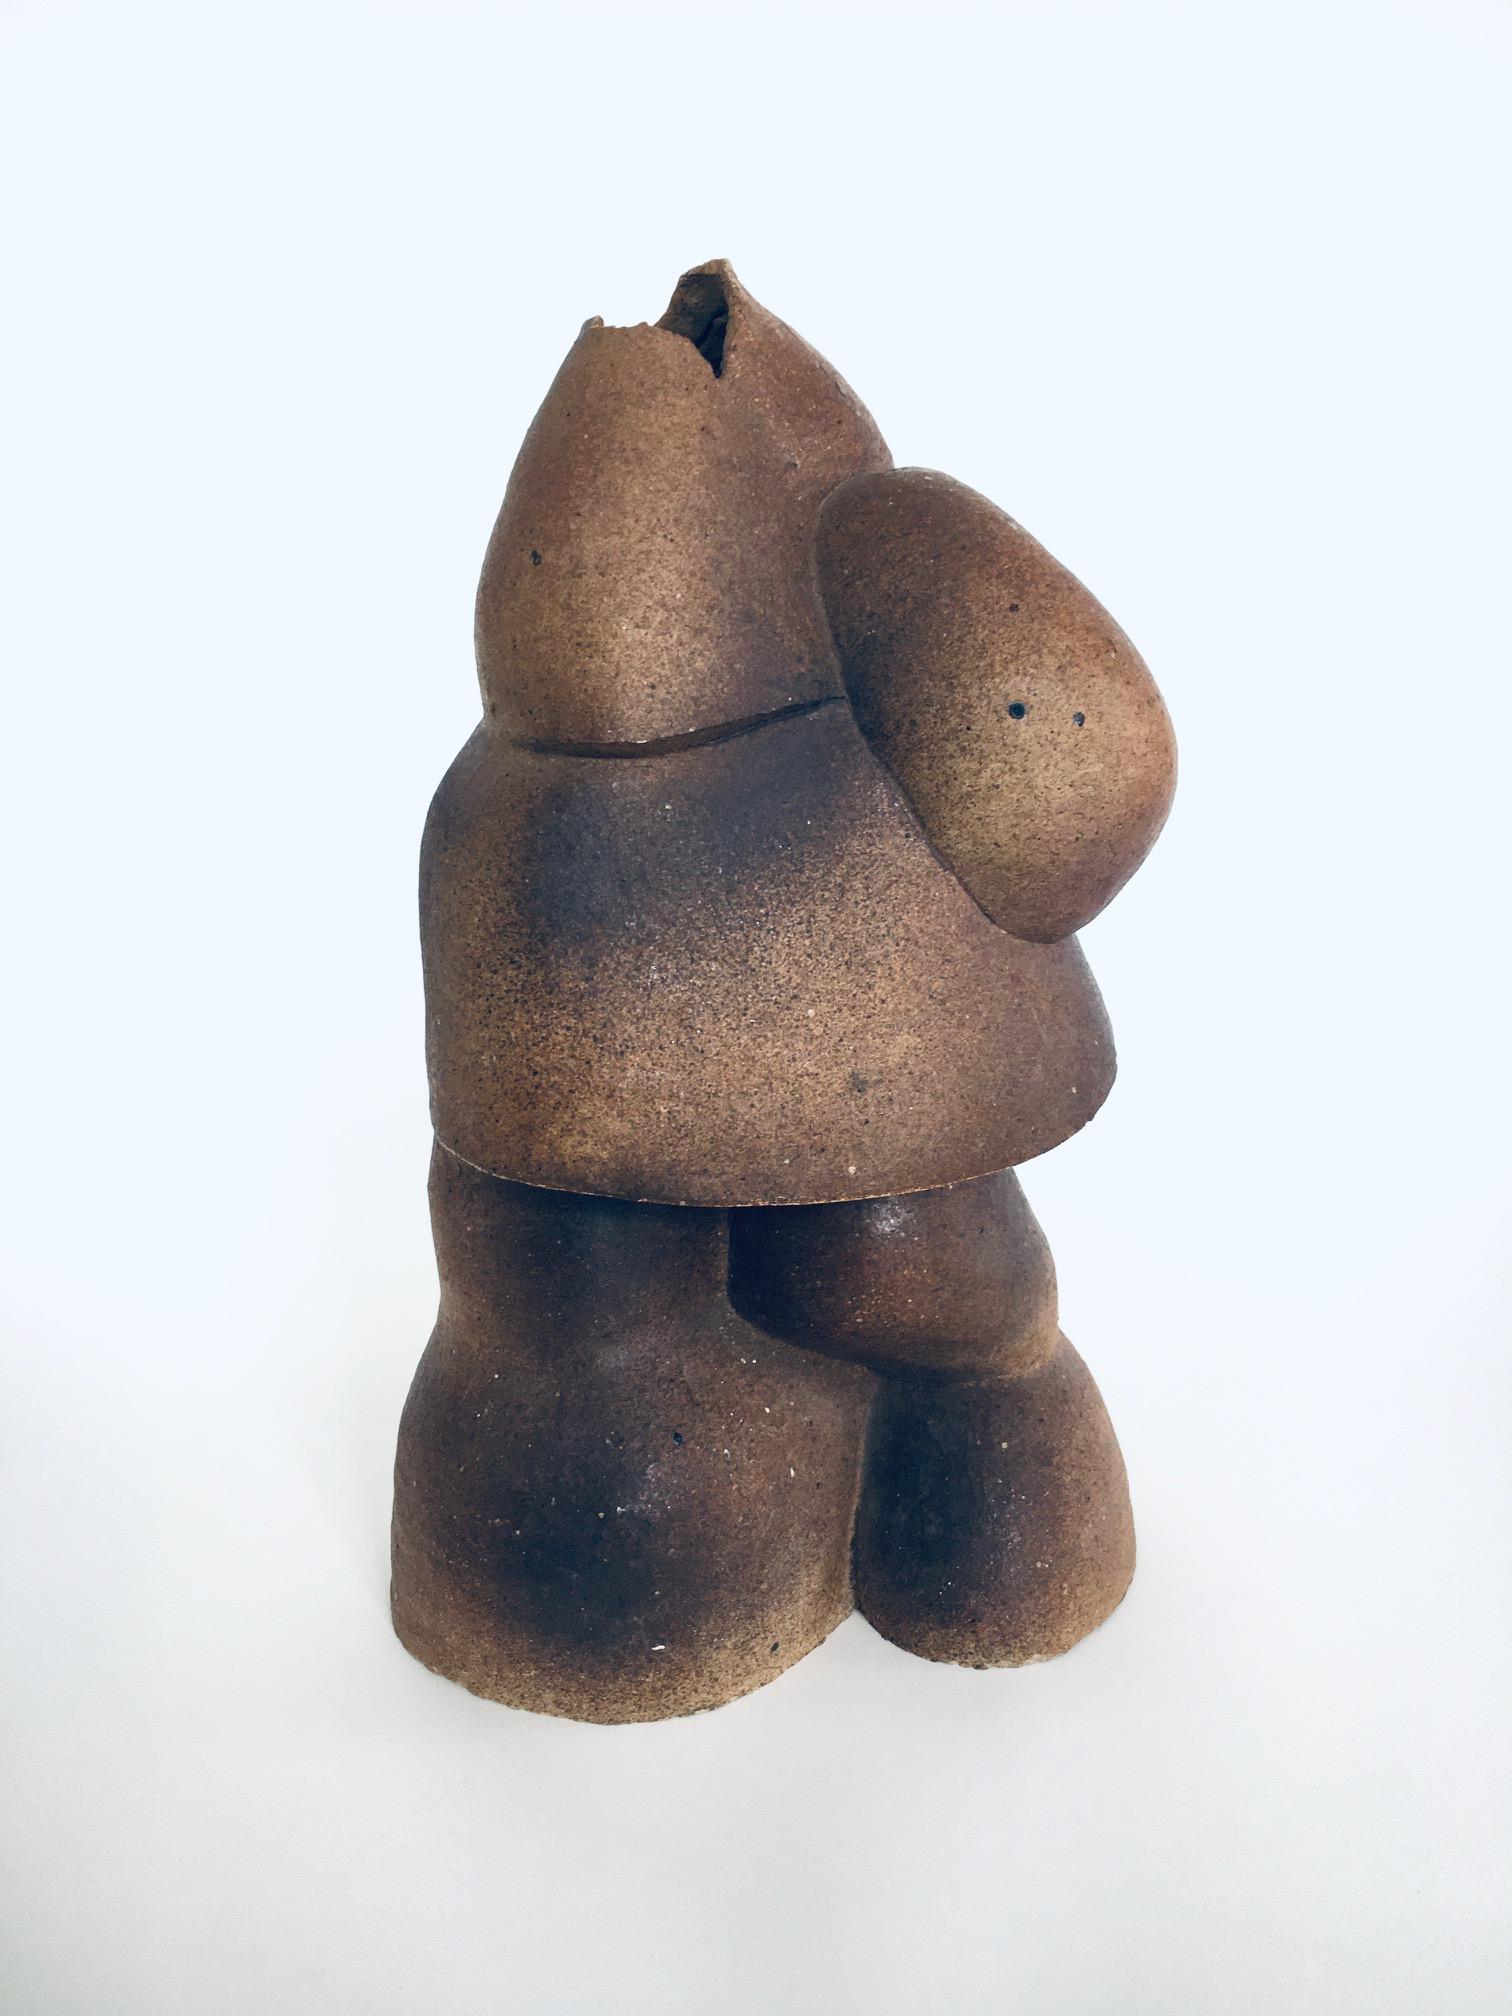 Vintage Brutalist Art Ceramic Studio Pottery Sculpture by Marie Rose Van De Putte. Made in Belgium, 1975. Signed on the bottom. Figurative abstract brutalist designed sculpture in brown matt sprayed glazes. A rare collectible art piece. This comes